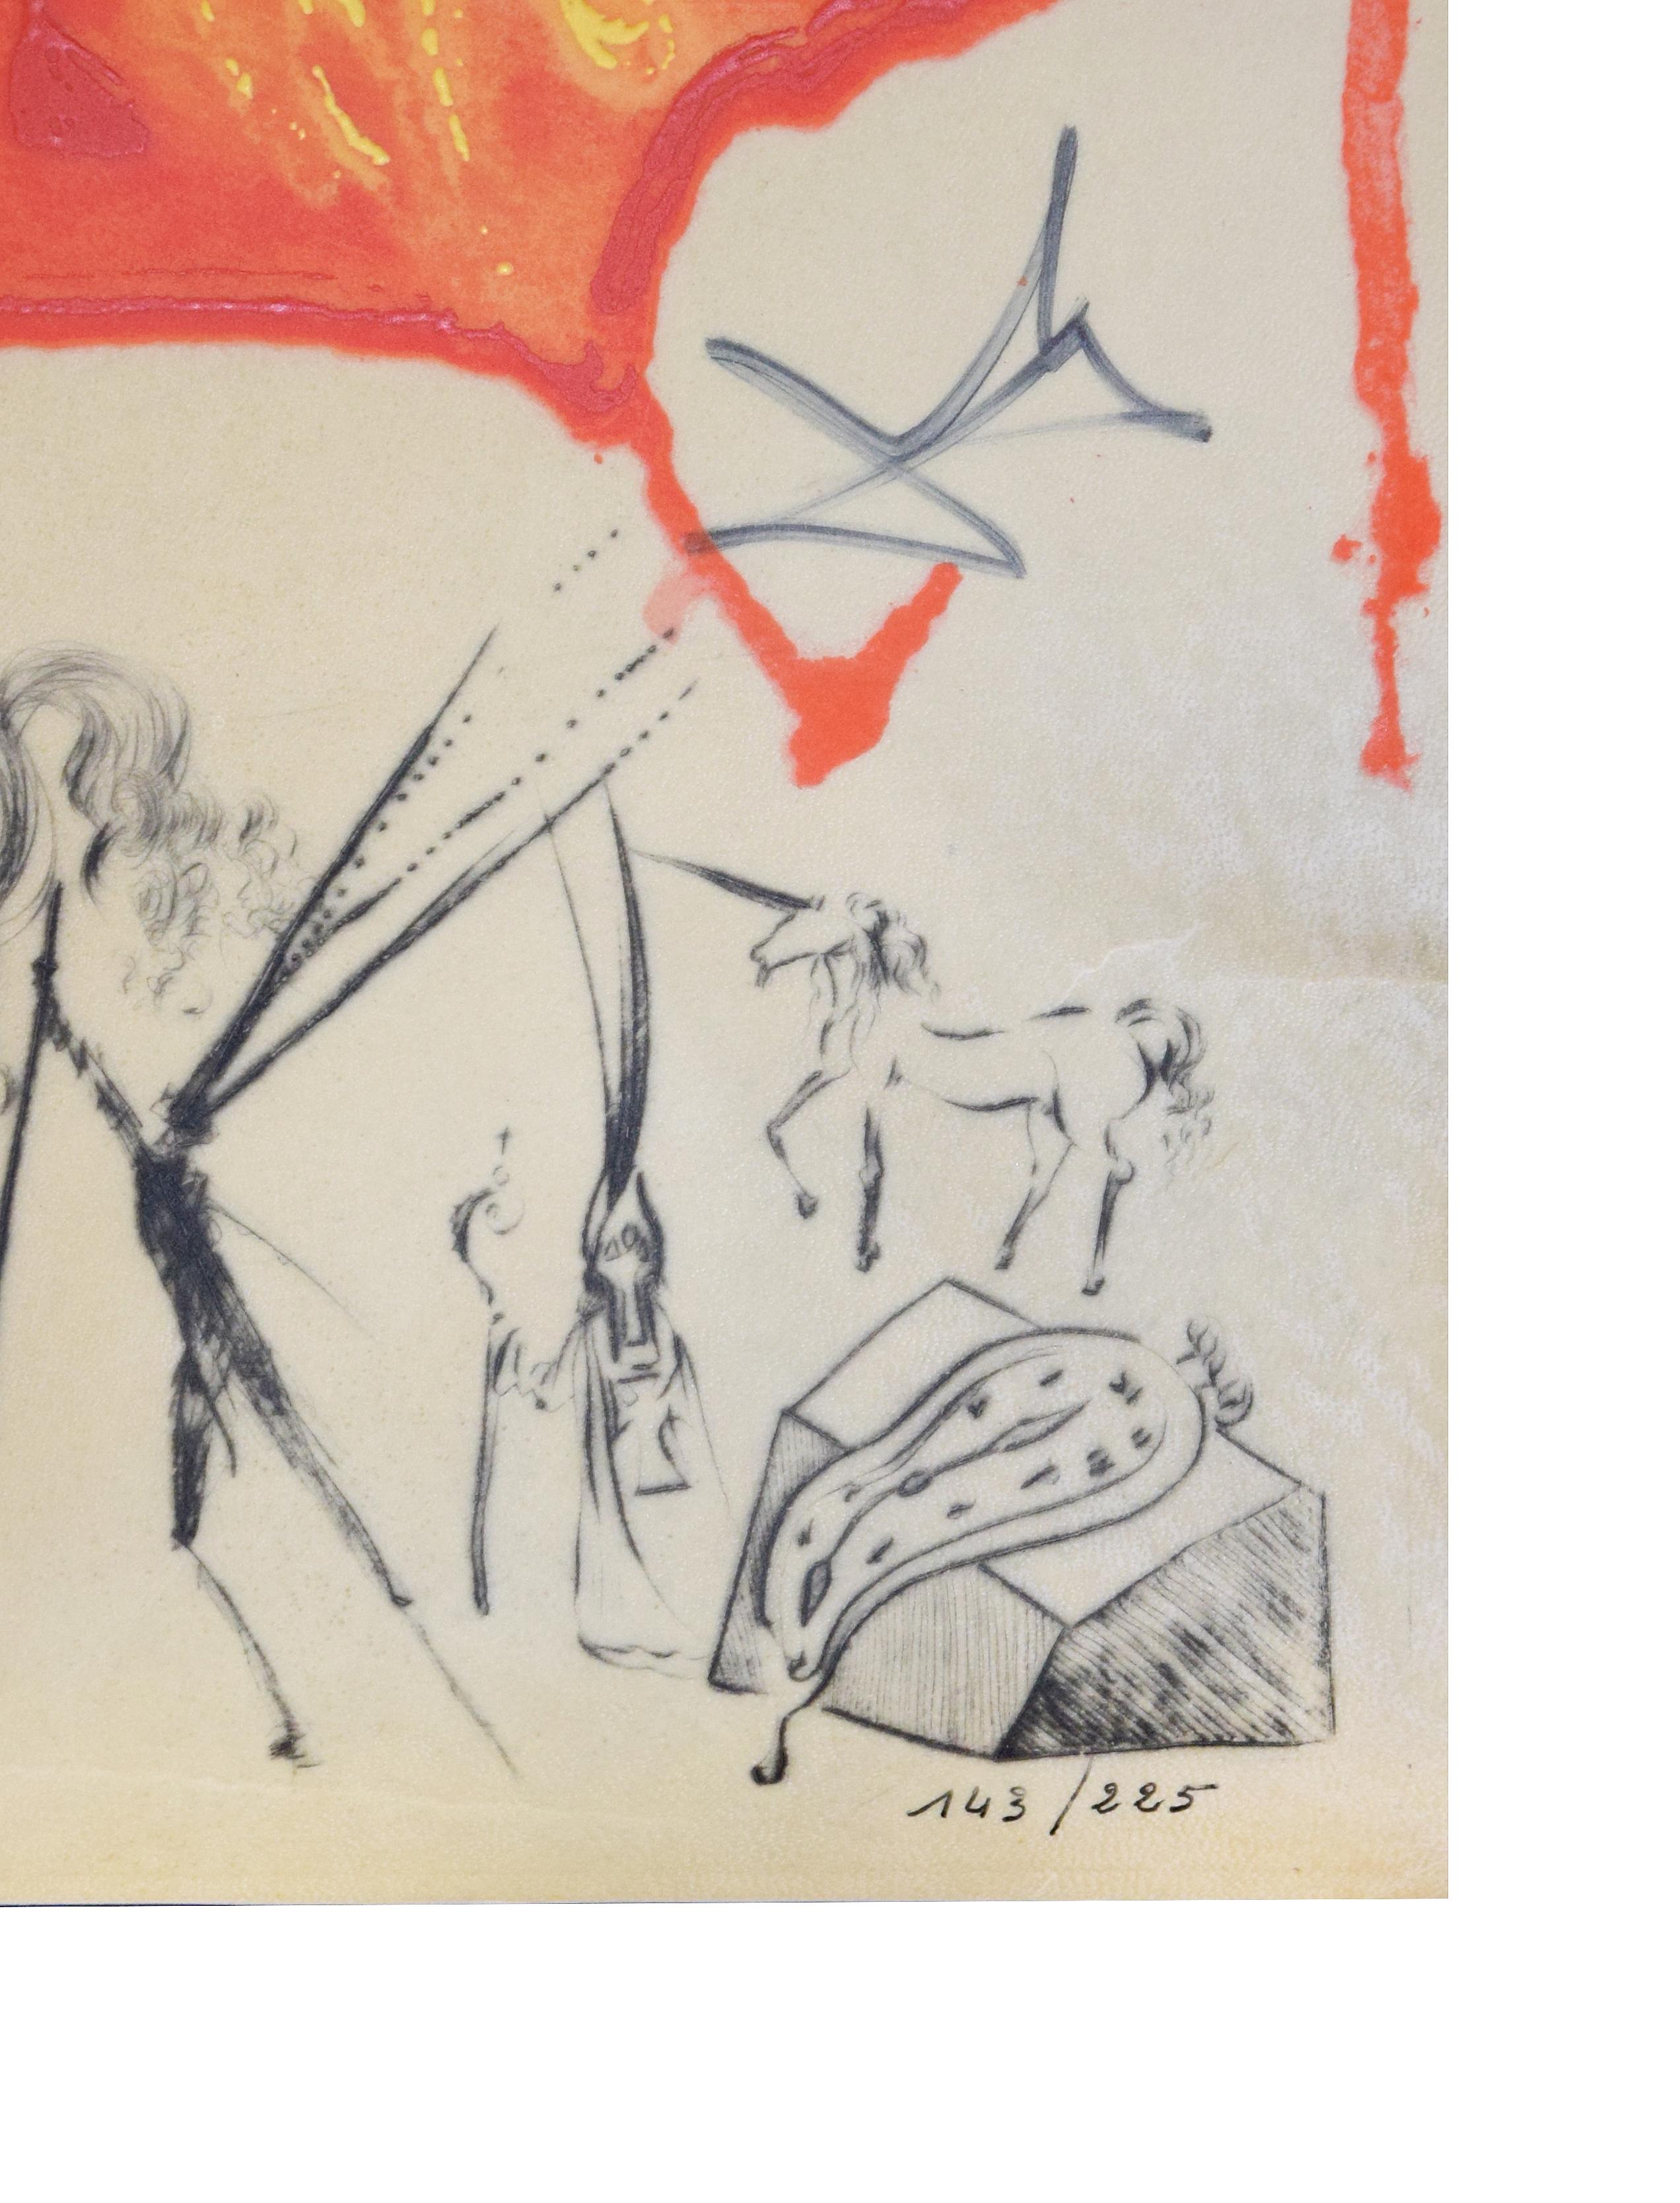 Le Creuset Philosophal is a superb etching with drypoint, lithograph, silkscreen, and collage on parchment by Salvador Dalí. Hand-signed in black pencil on the lower right margin. Hand-numbered in Arab numerals on the lower right. Edition of 225